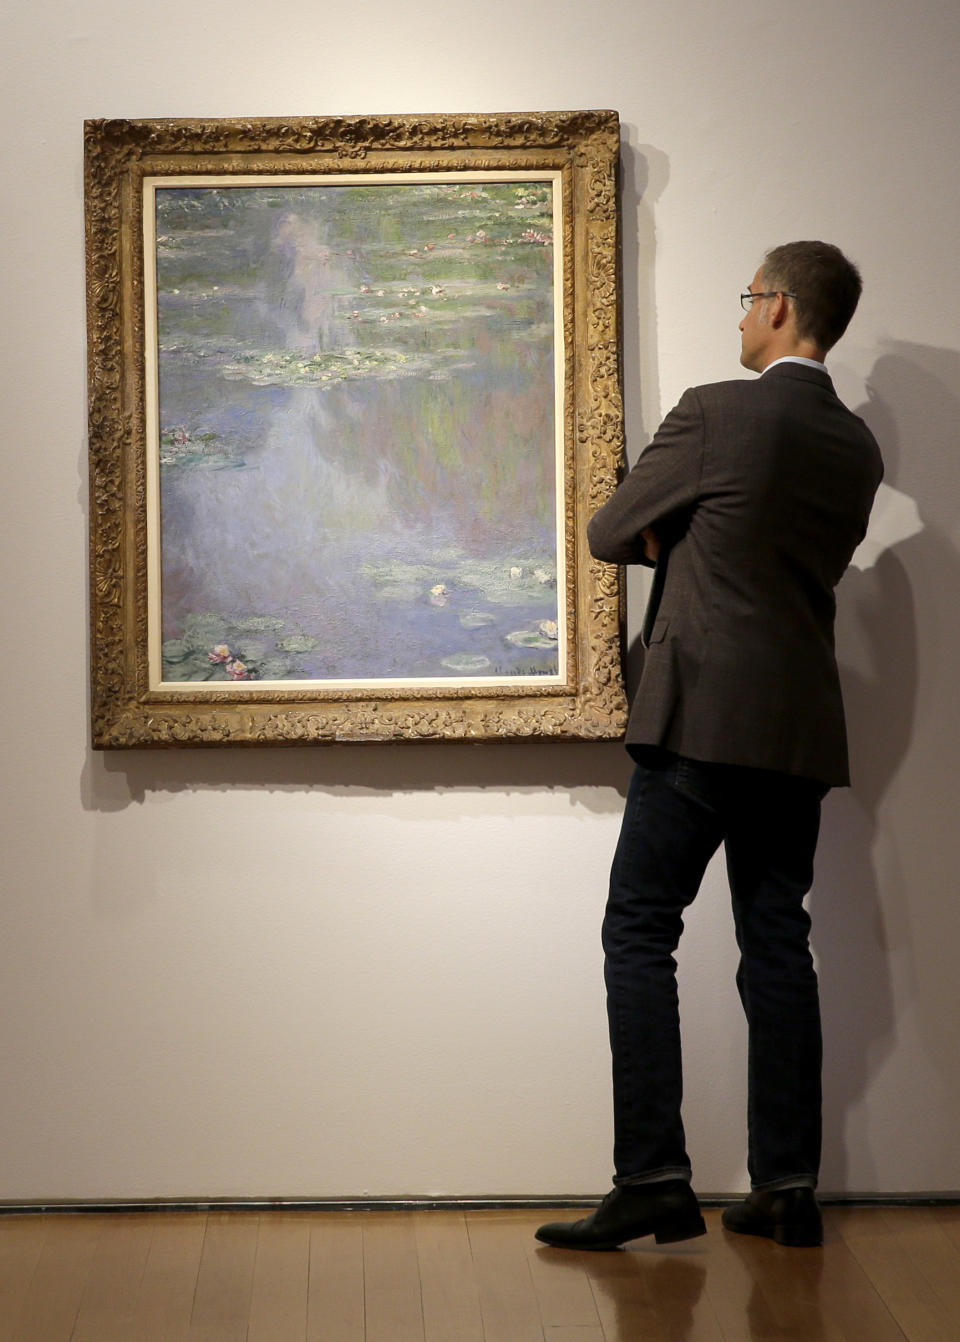 A man gets a closer look at "Nympheas" by Claude Monet during an auction preview at Christie's in New York, Tuesday, May 6, 2014. Works from the estates of heiress Huguette Clark, Edgar Bronfman and other major collectors are leading New York City’s spring art auctions. The sale of impressionist and modern art begins Tuesday evening at Christie’s. The auction house says it expects to raise over $245 million. (AP Photo/Seth Wenig)